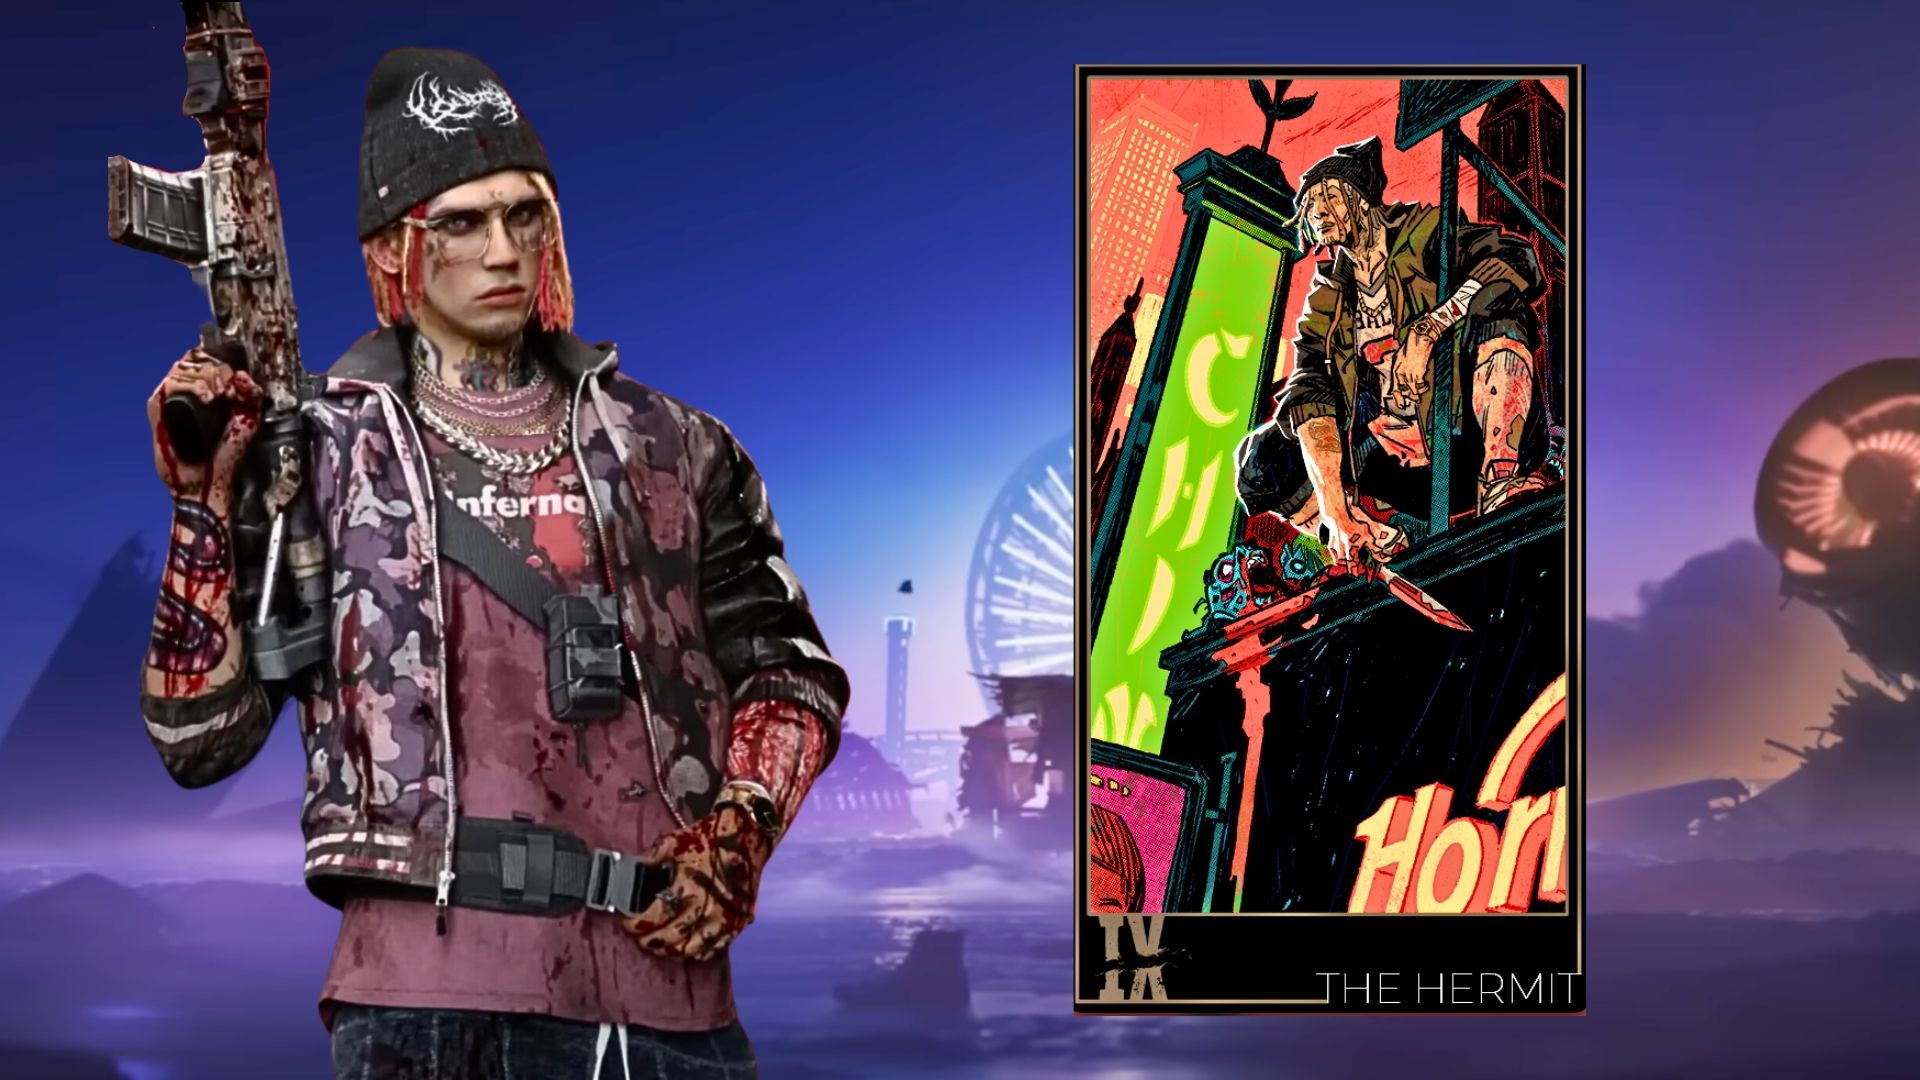 Bruno Character Image and Card from Dead Island 2